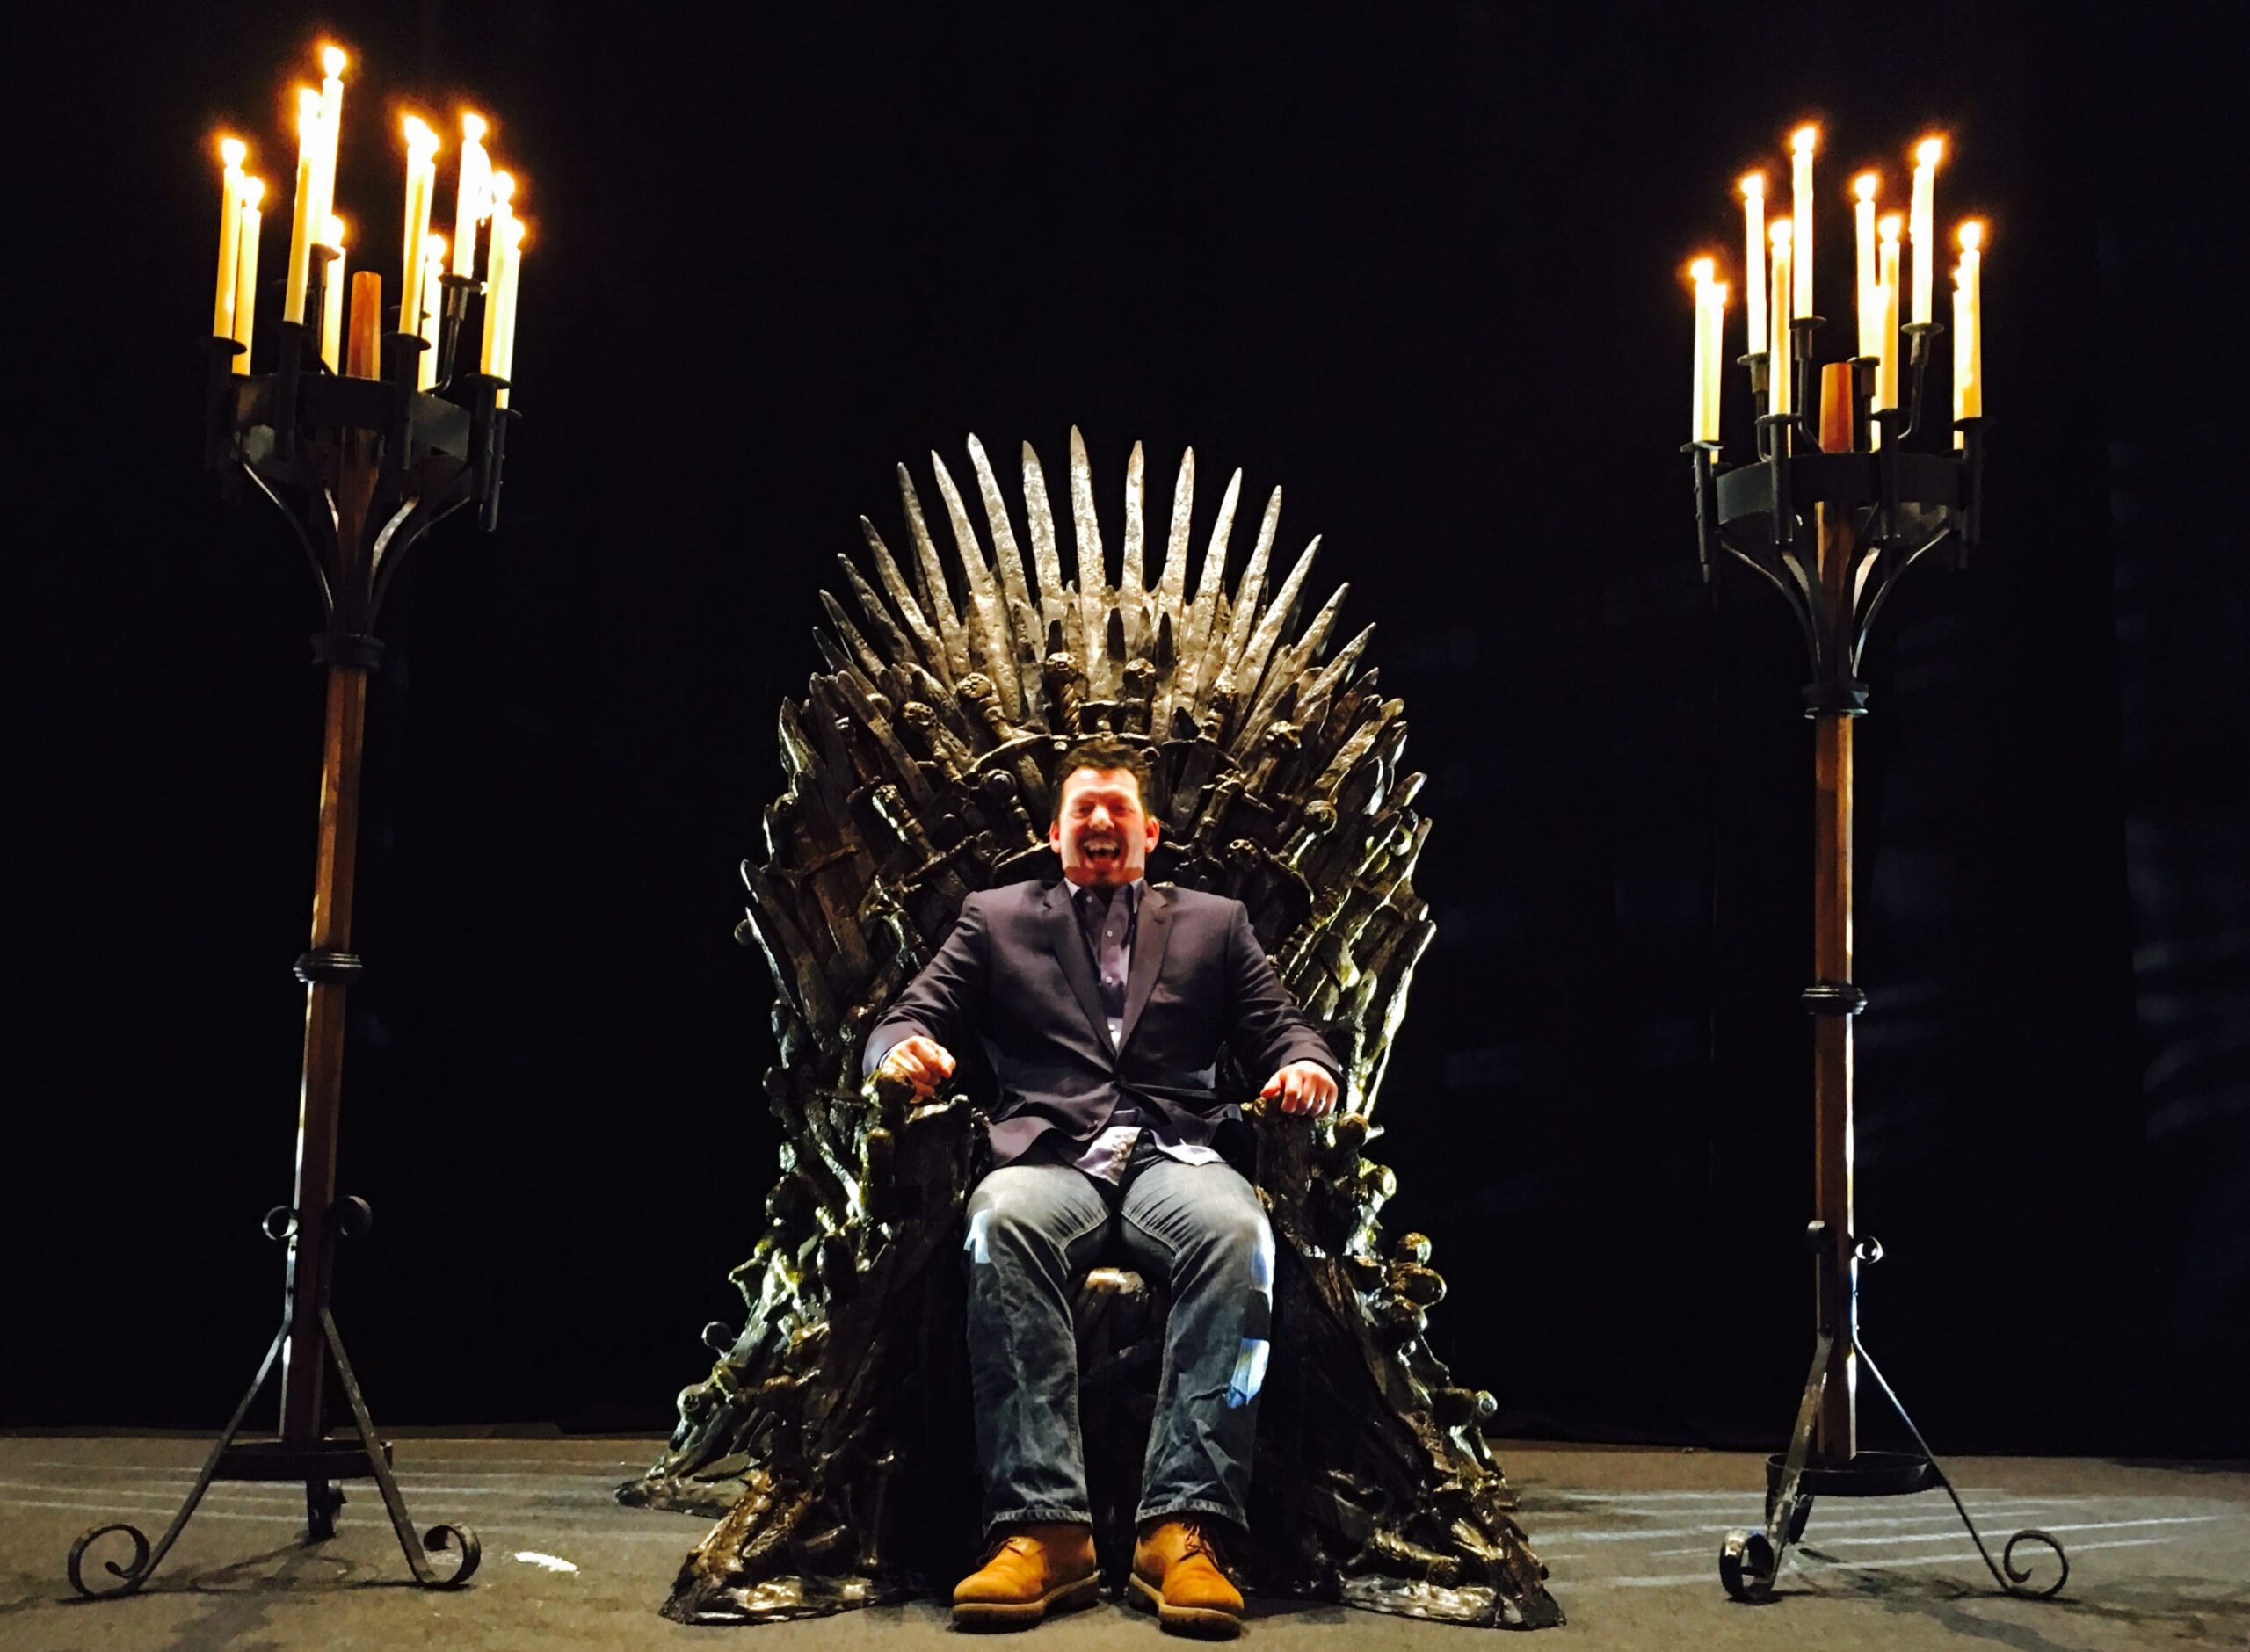 Piers as the Mad King in his throne